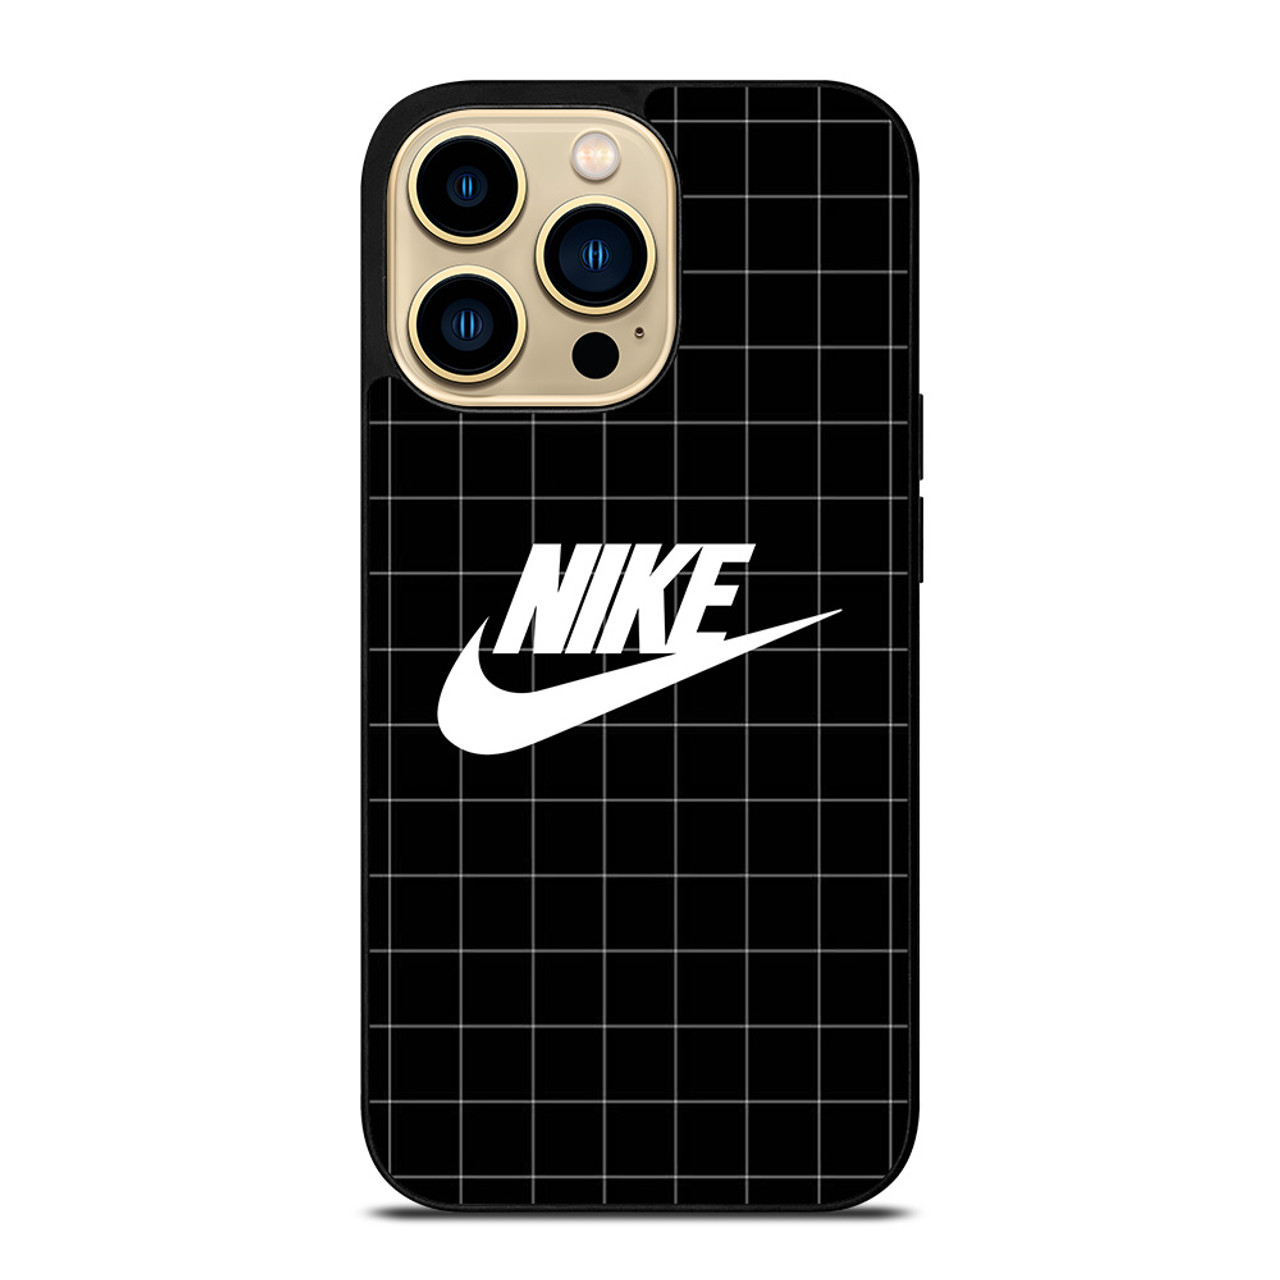 NIKE LOGO AESTHETIC iPhone 14 Pro Max Case Cover